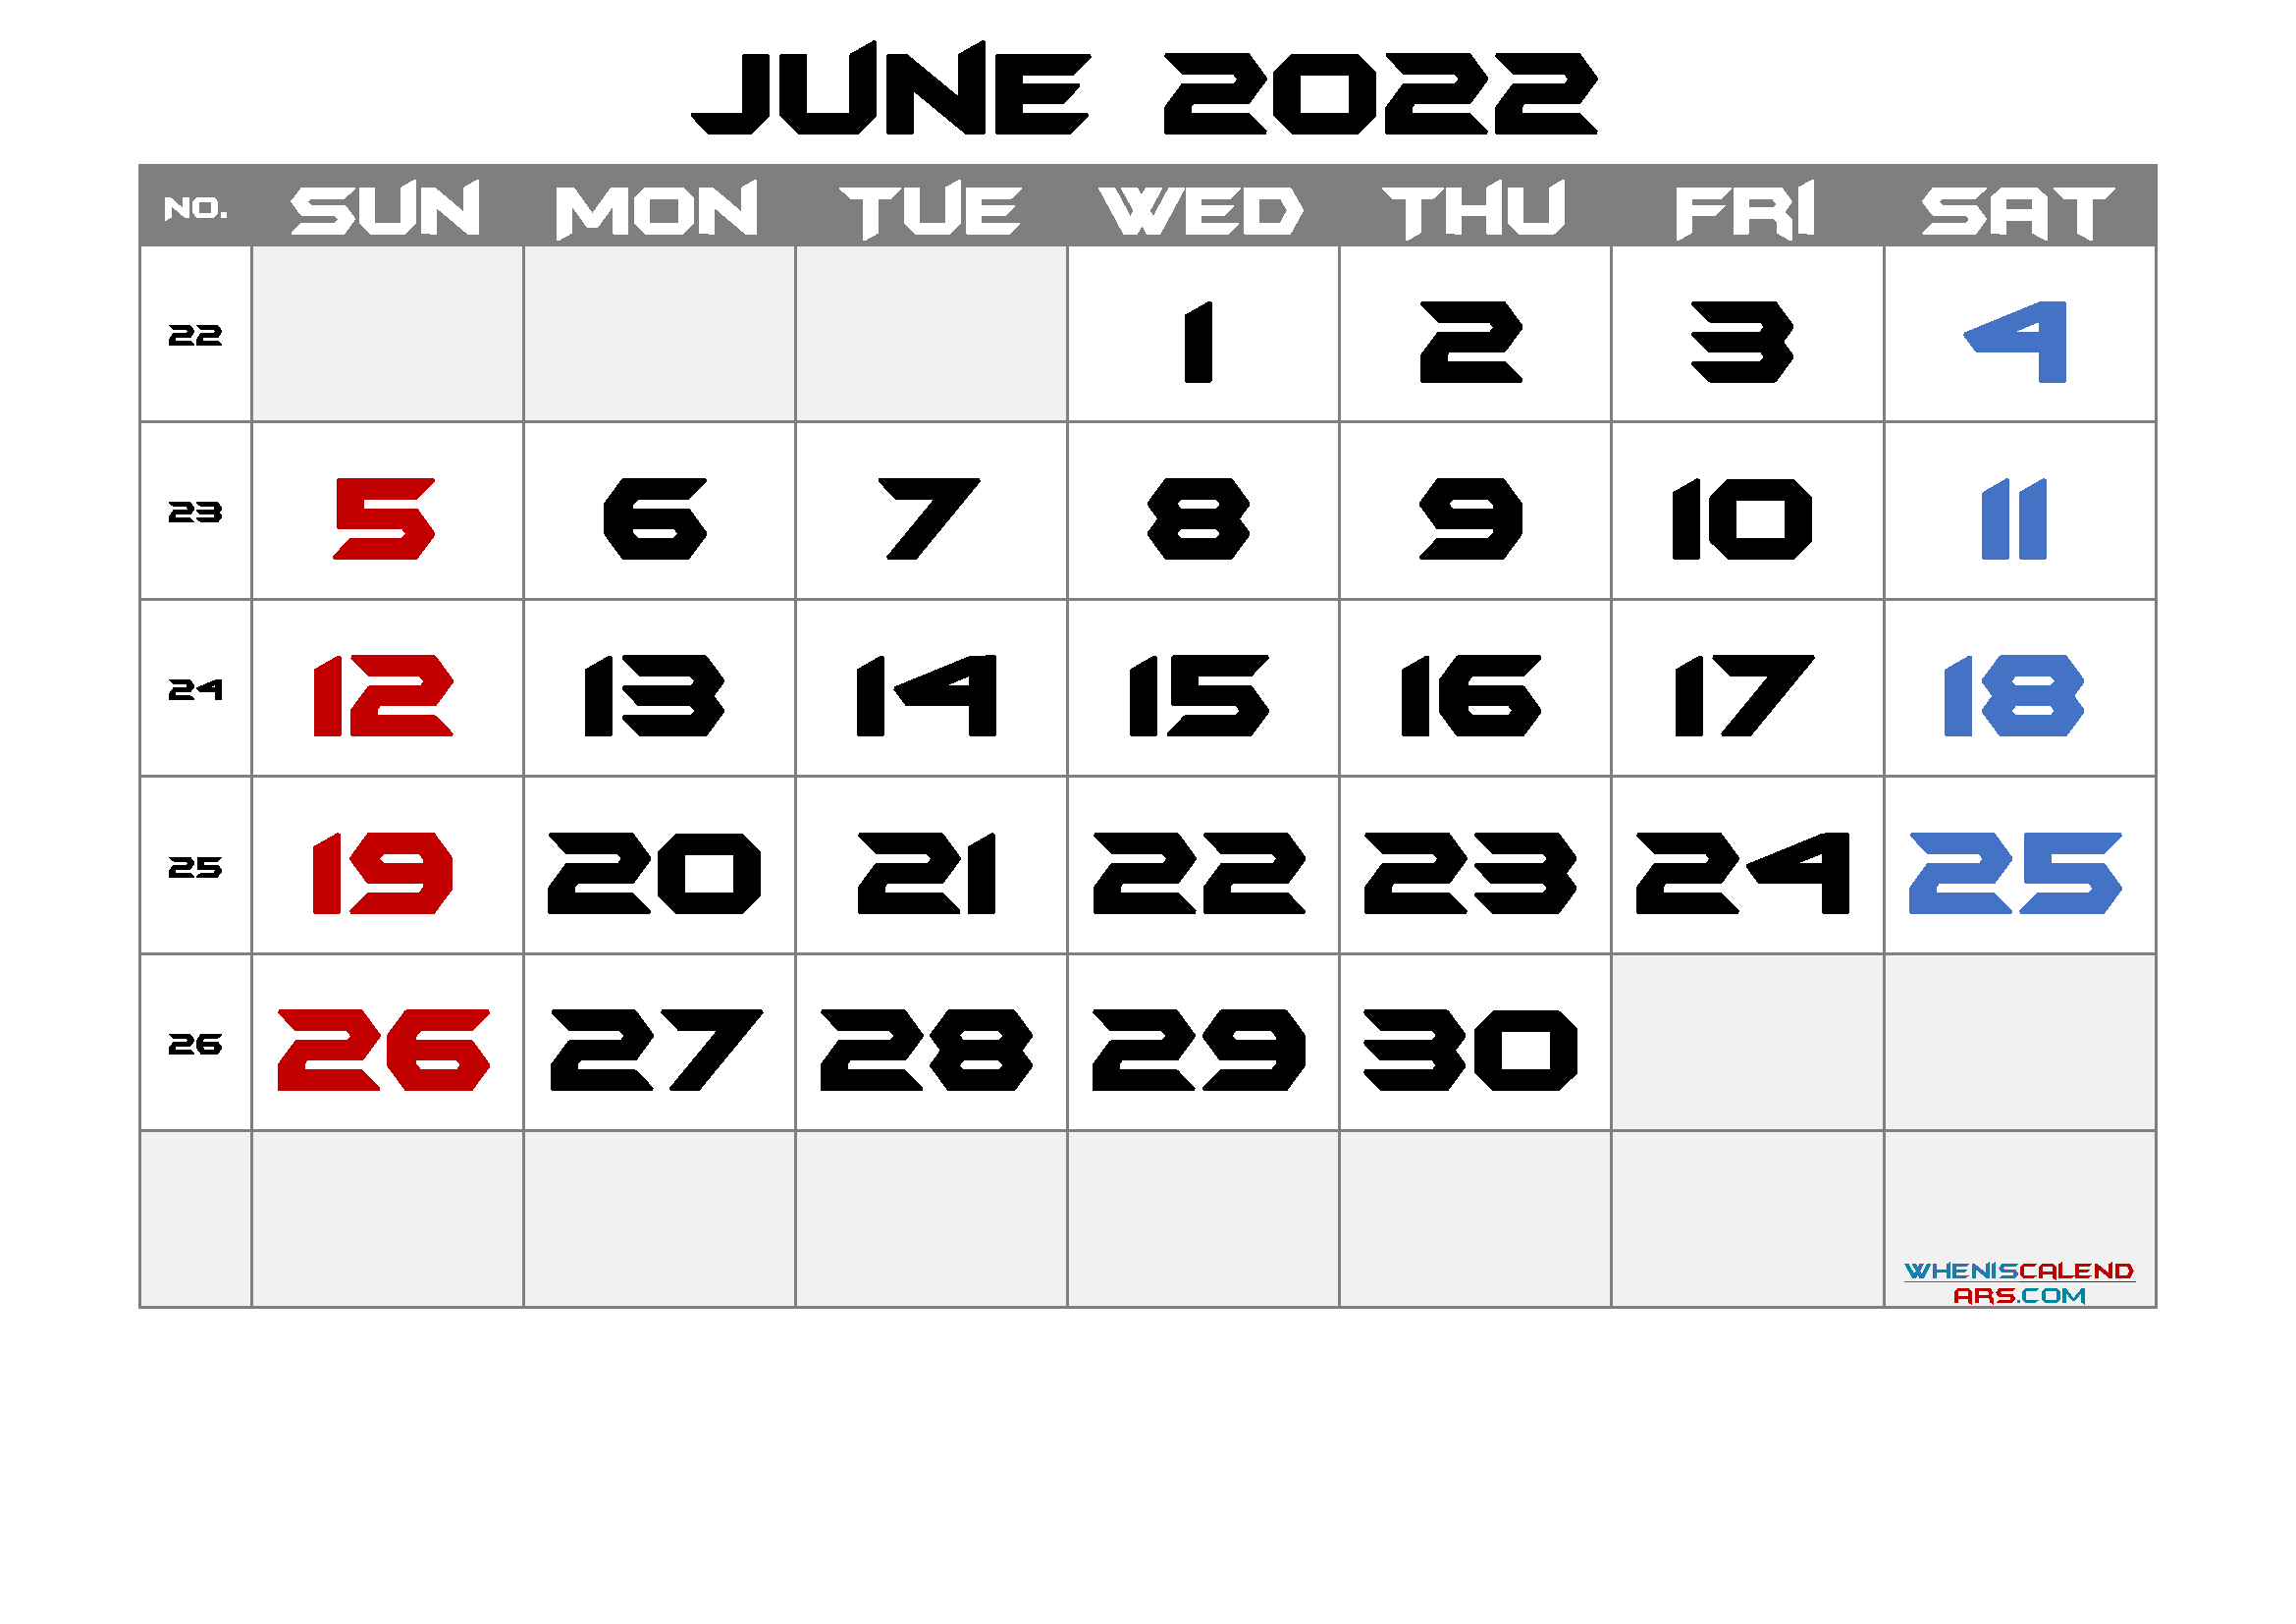 Free Printable Calendar June 2022 with Week Numbers as PDF and high resolution Image